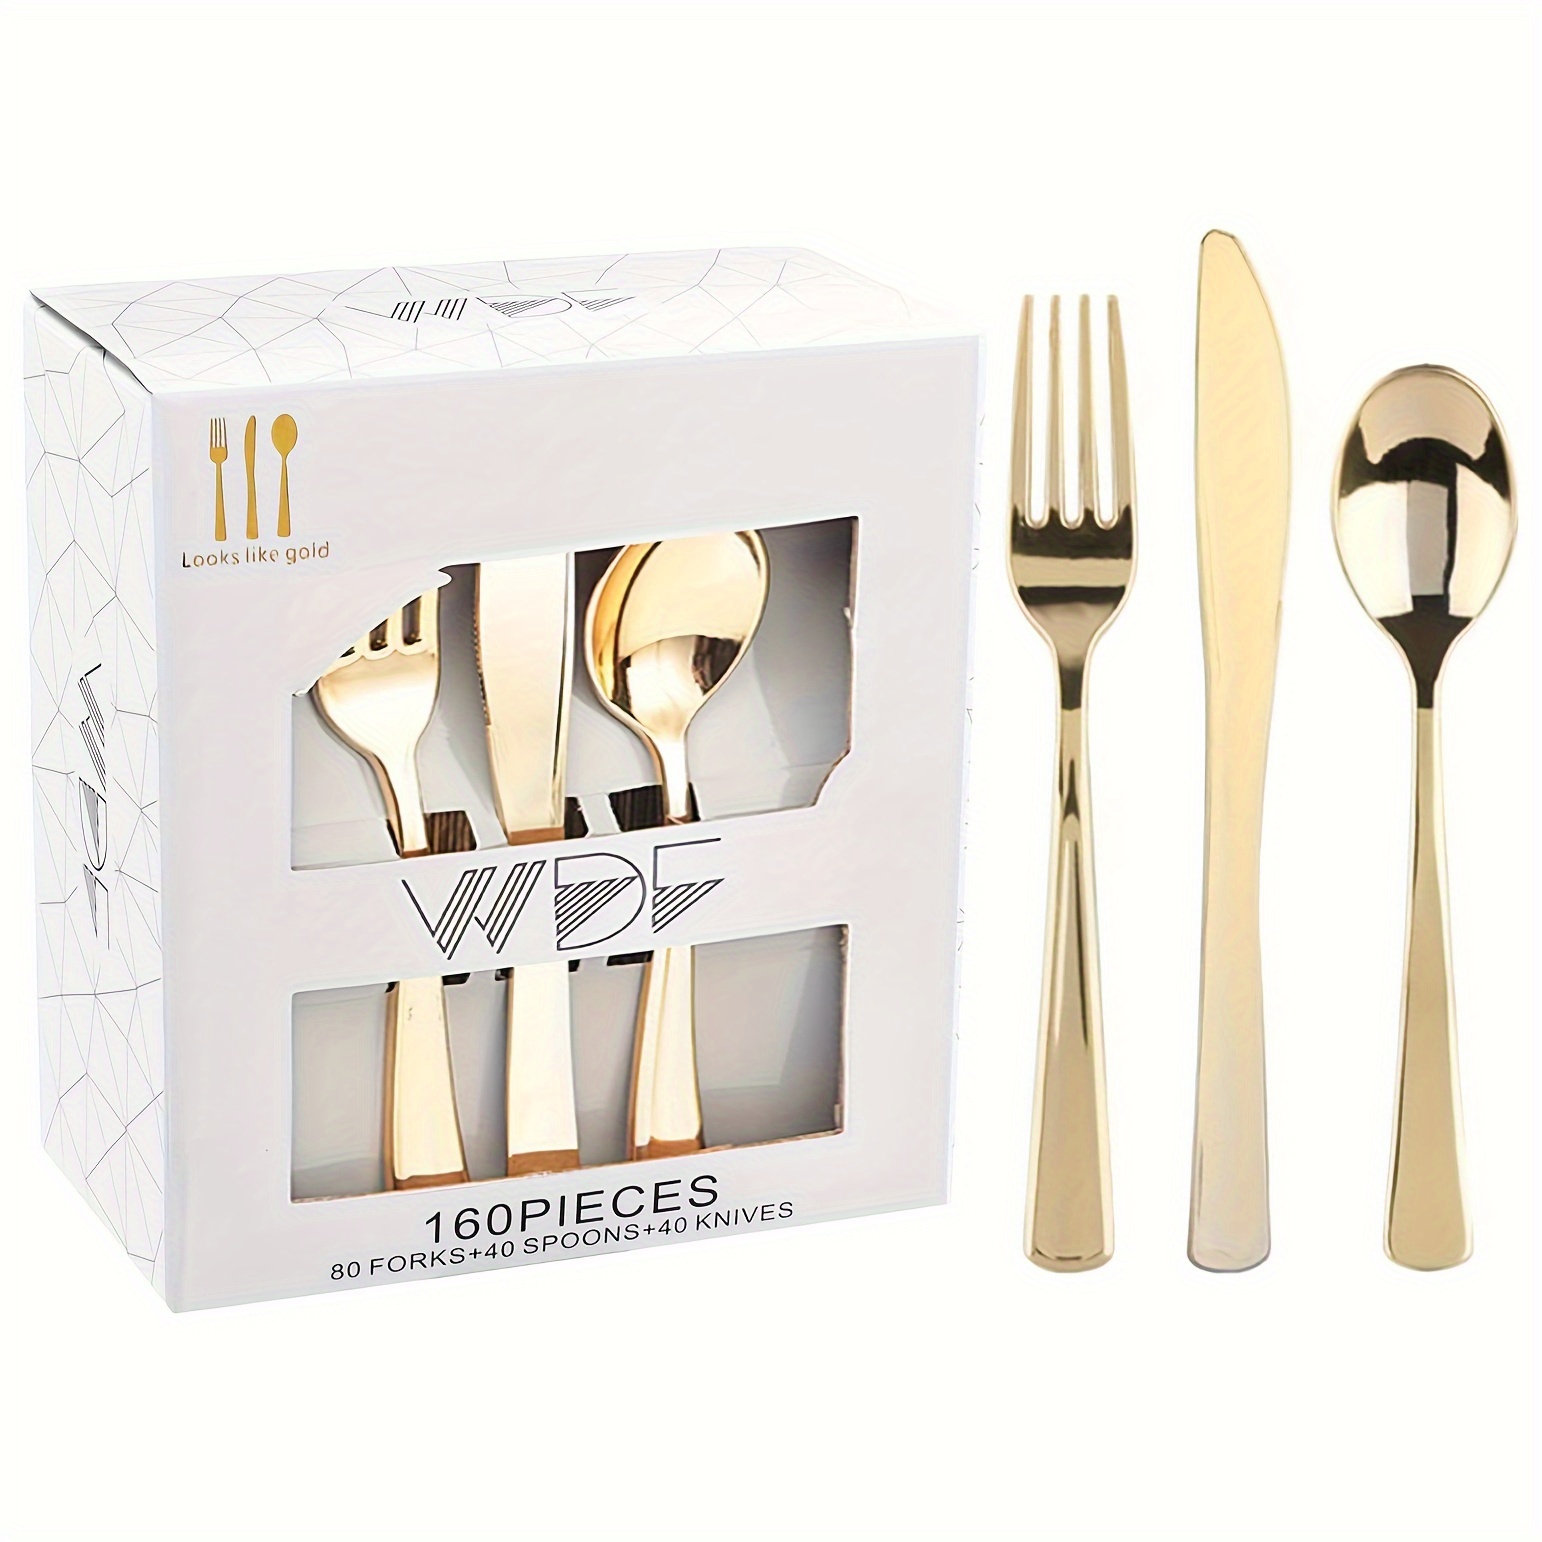 

160 Piece Gold Plastic Silverware - Heavy Duty Gold Silverware Includes 80 Gold Forks, 40 Gold Spoons, 40 Gold Knives, Gold Plastic Utensils Perfect For Wedding, Party Or Daily Using